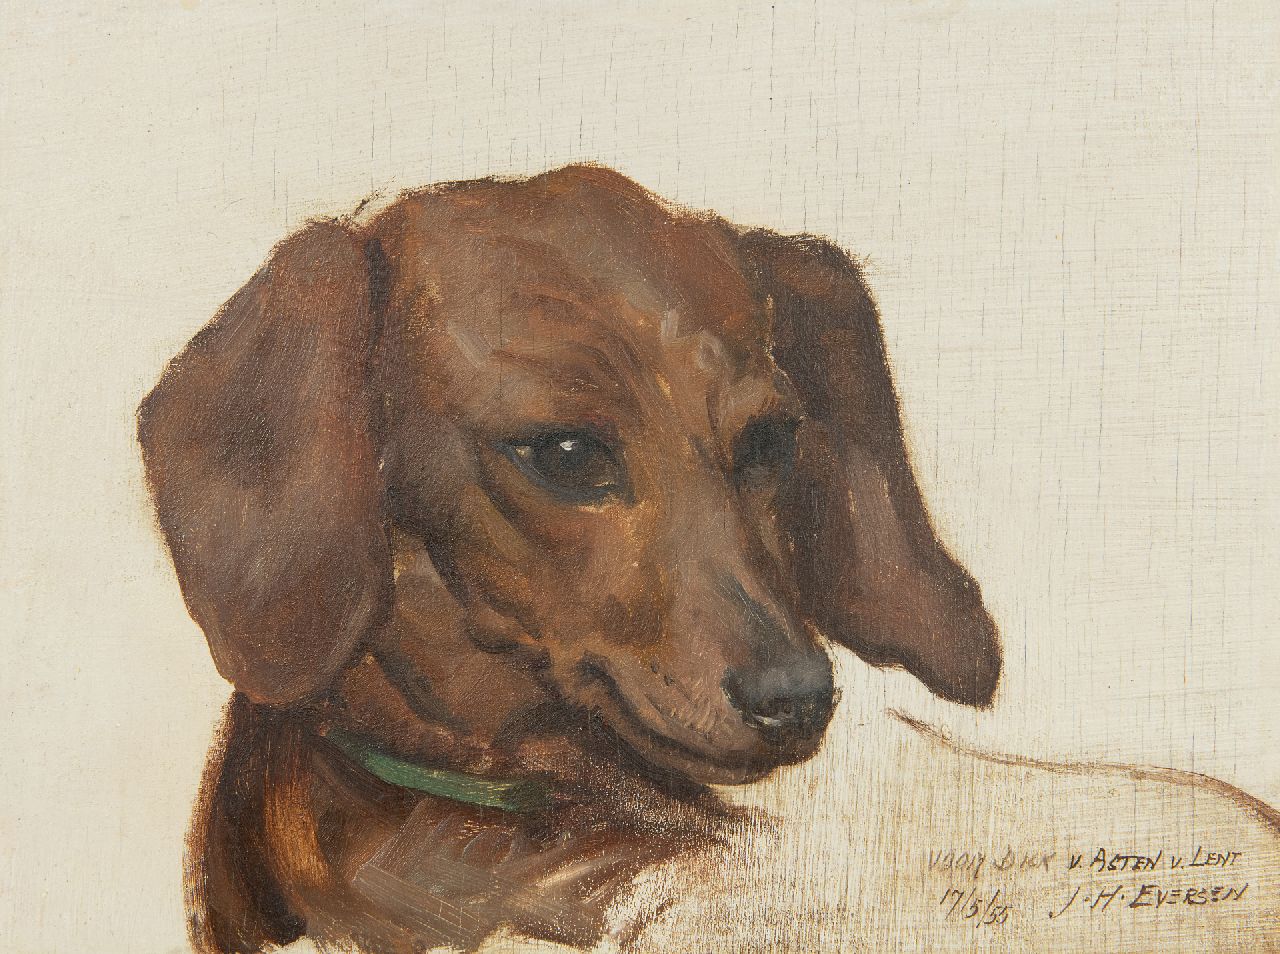 Eversen J.H.  | Johannes Hendrik 'Jan' Eversen | Paintings offered for sale | Portrait of a Dachshund, oil on panel 17.9 x 23.9 cm, signed l.r. and dated 17/5/55